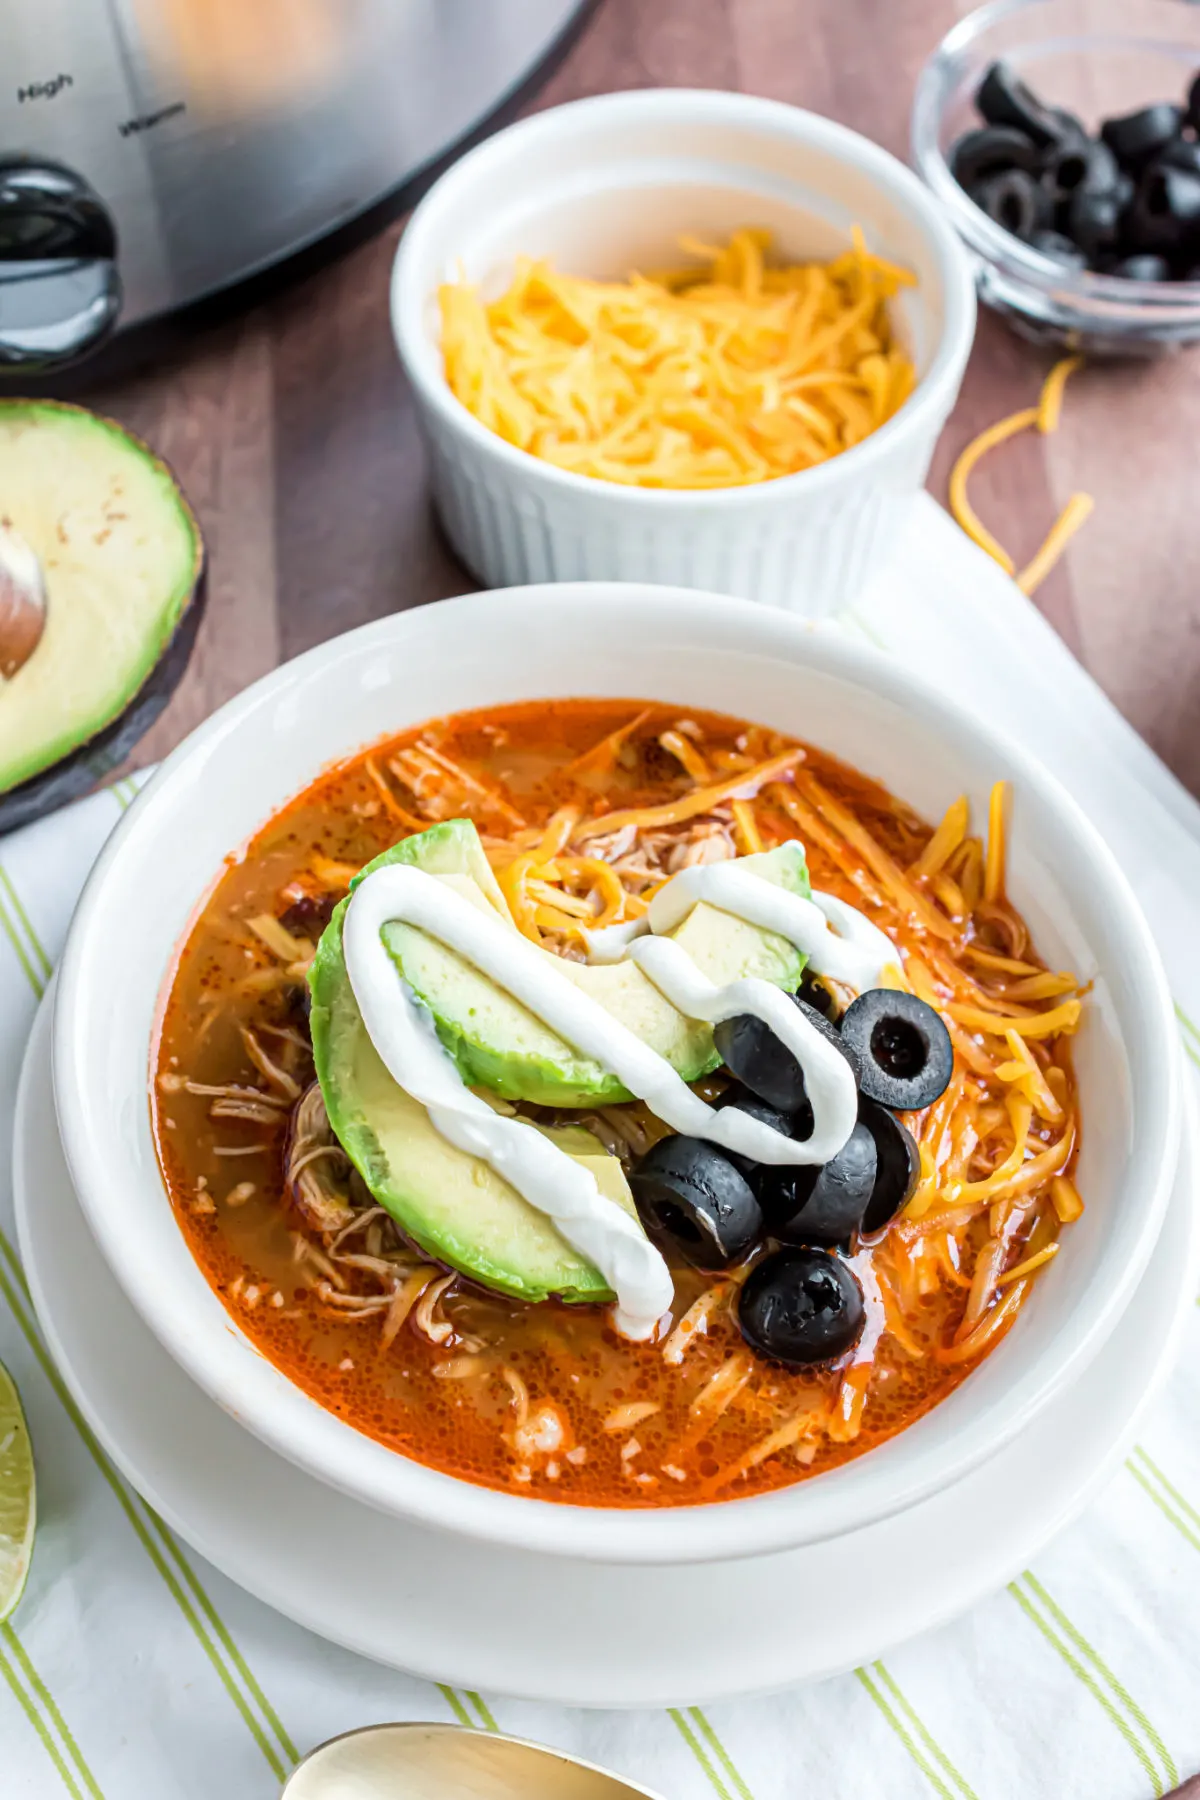 Bowl of chicken enchilada soup garnished with olives, avocado, and sour cream.